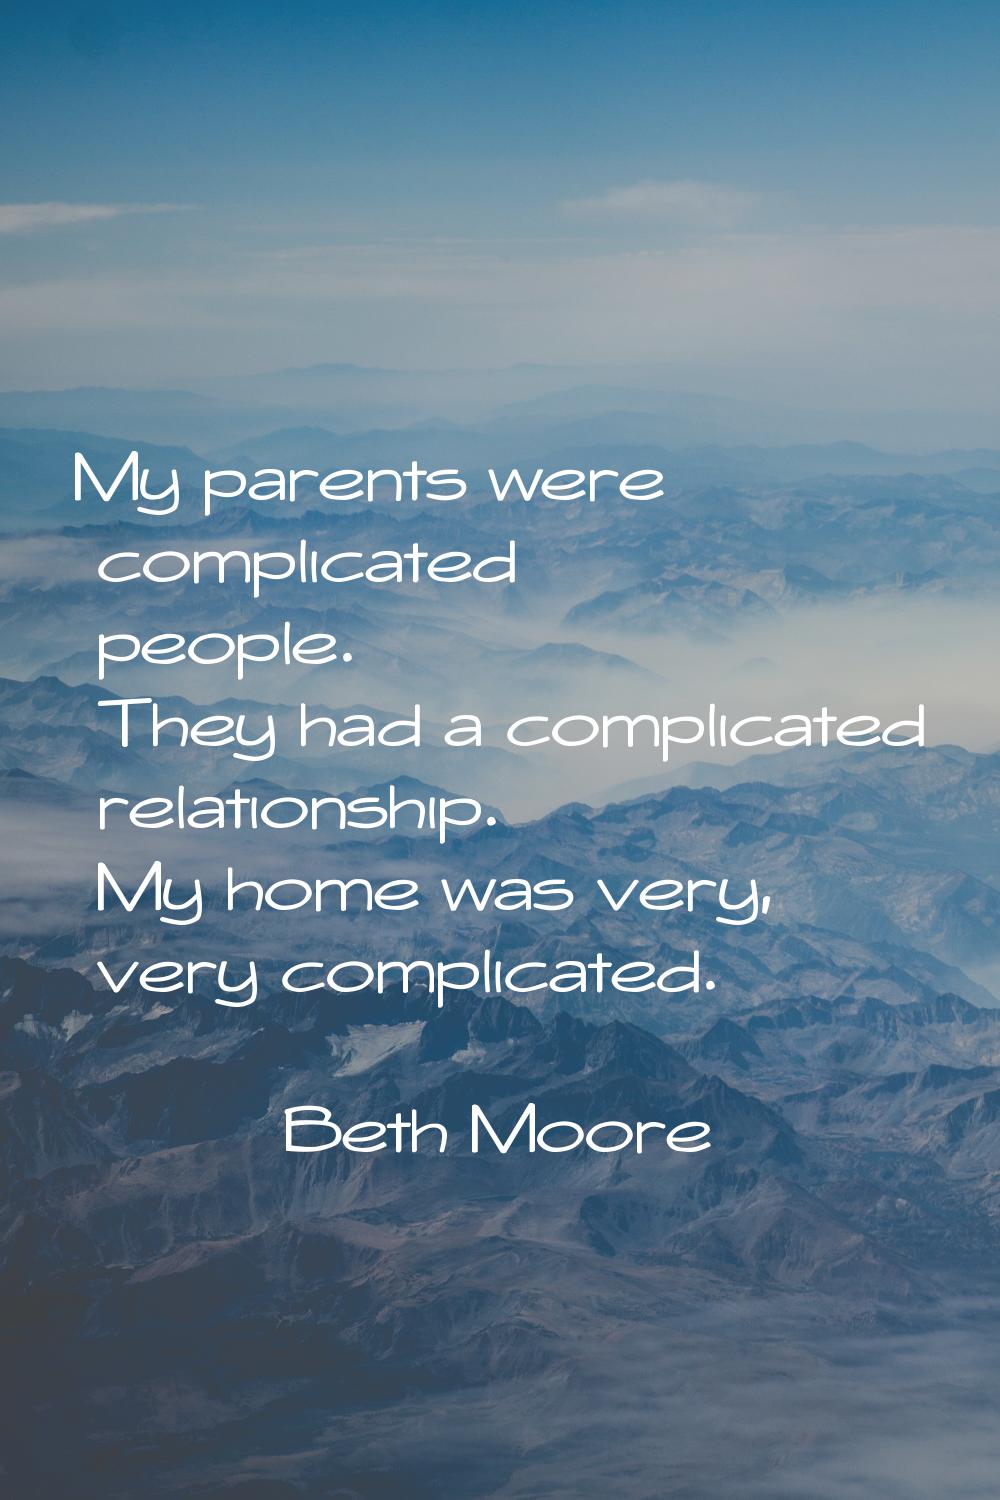 My parents were complicated people. They had a complicated relationship. My home was very, very com